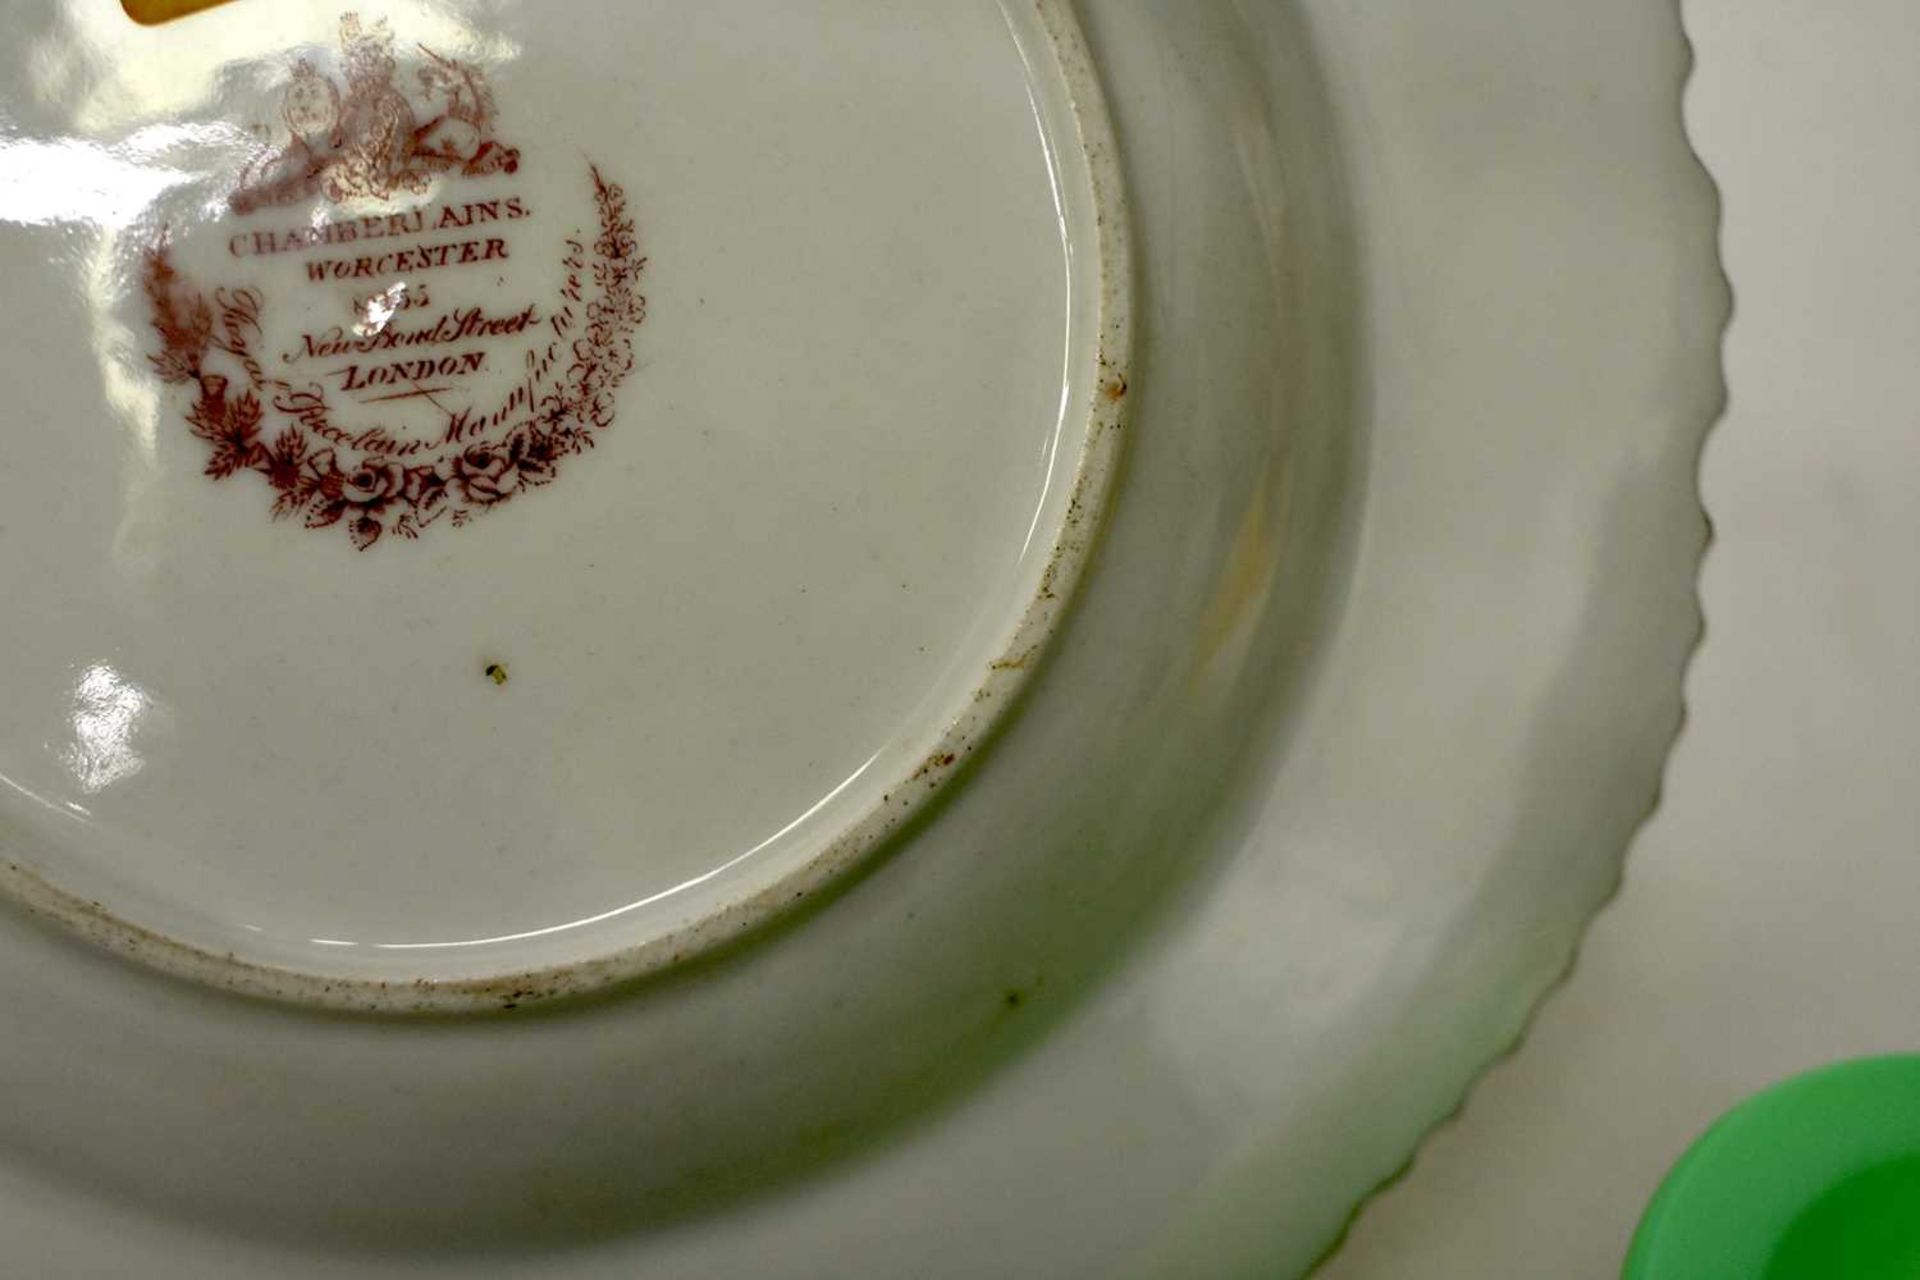 THREE EARLY 19TH CENTURY CHAMBERLAINS WORCESTER PORCELAIN PLATES together with two other - Image 50 of 51